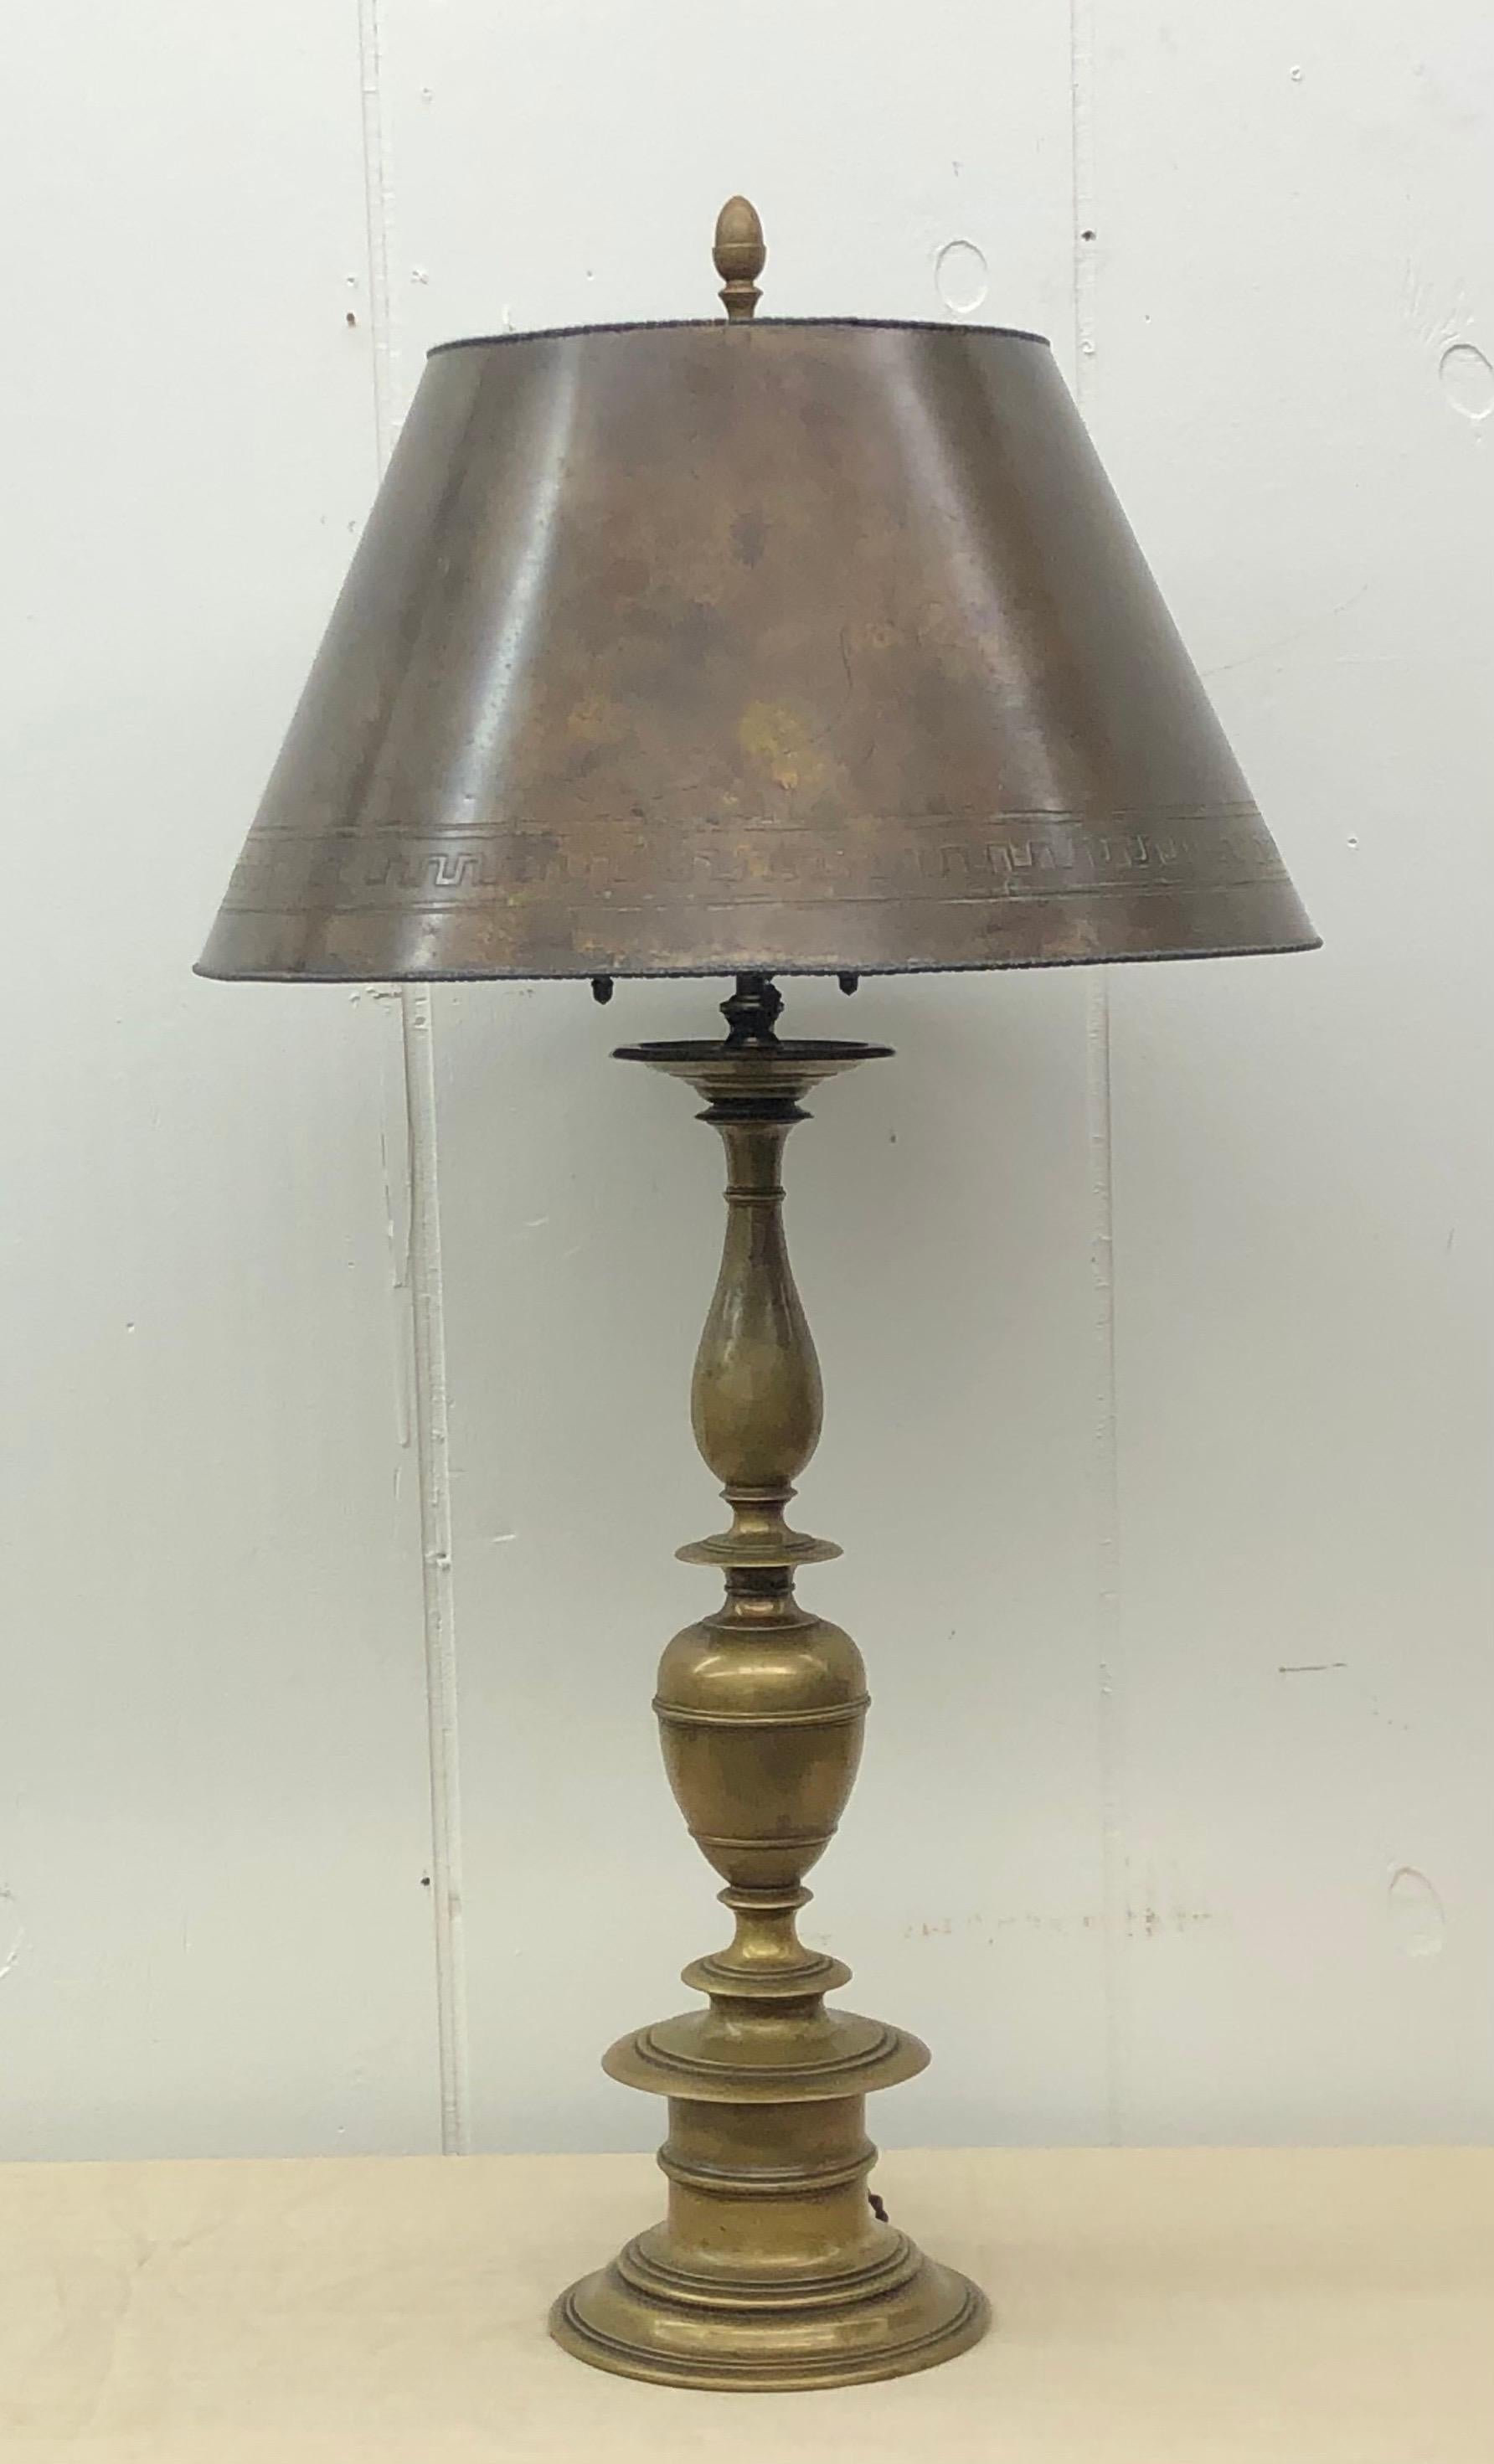 Elegant Caldwell lamp in the Baroque style with baluster standard toped with original three light cluster and final. The brass shade has a pressed Greek key design with reel and rod edging on the top and bottom of the shade. The patinated shade is